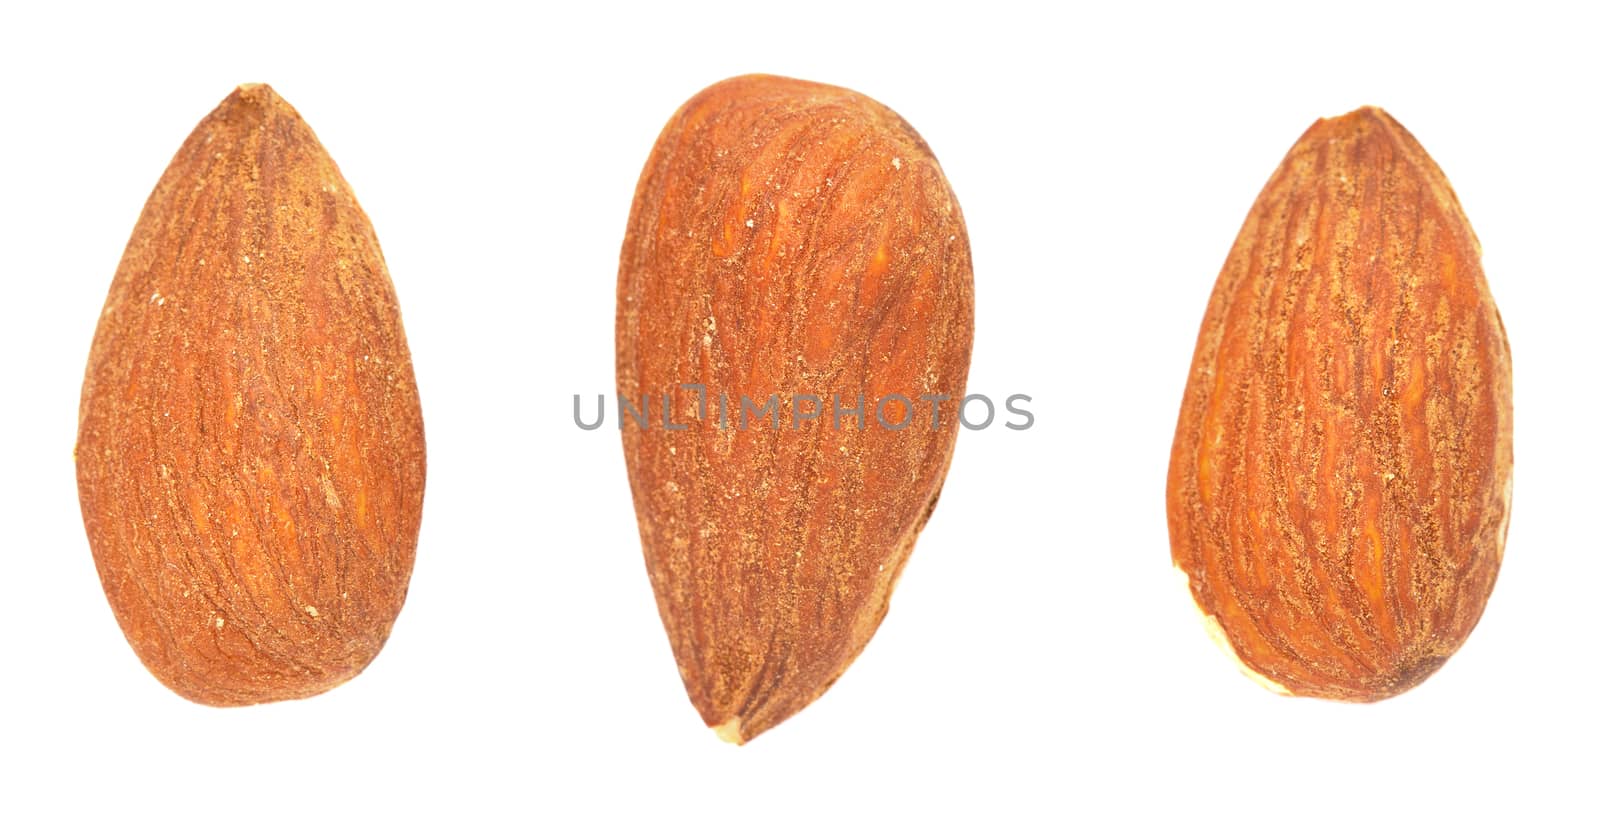 Three Almond kernels on a white background